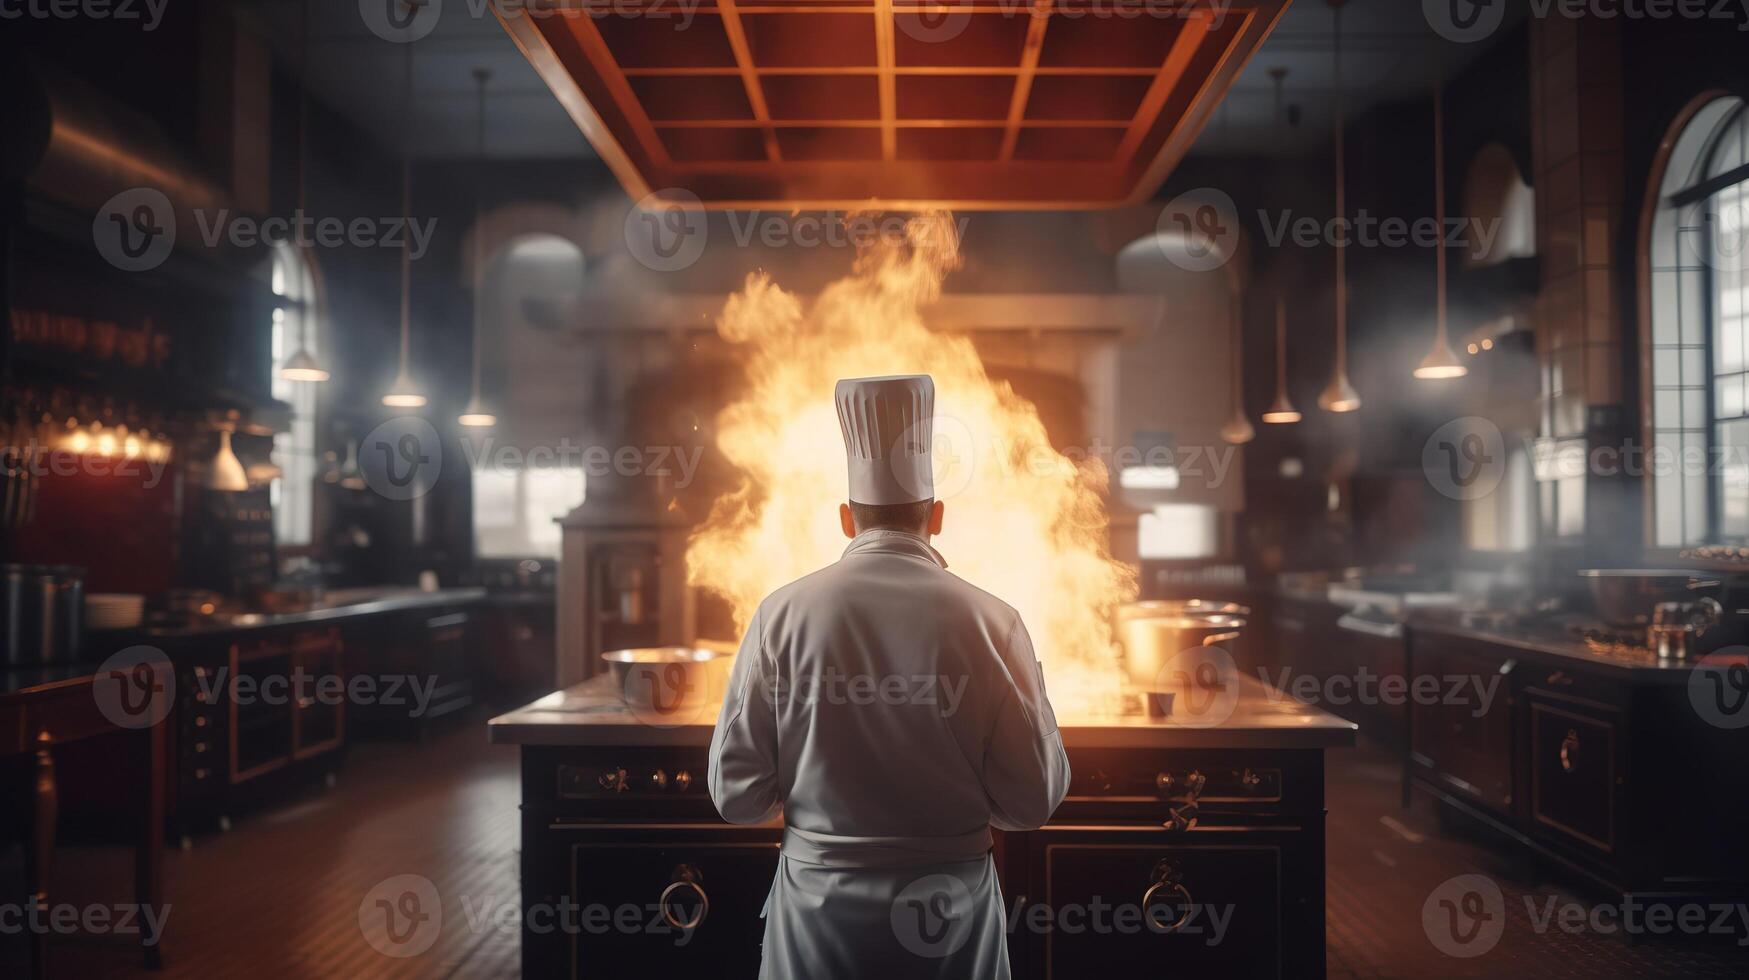 The Master Chef in Action, Creating Culinary Magic Amidst Smoke and Flames in the Restaurant Kitchen. photo